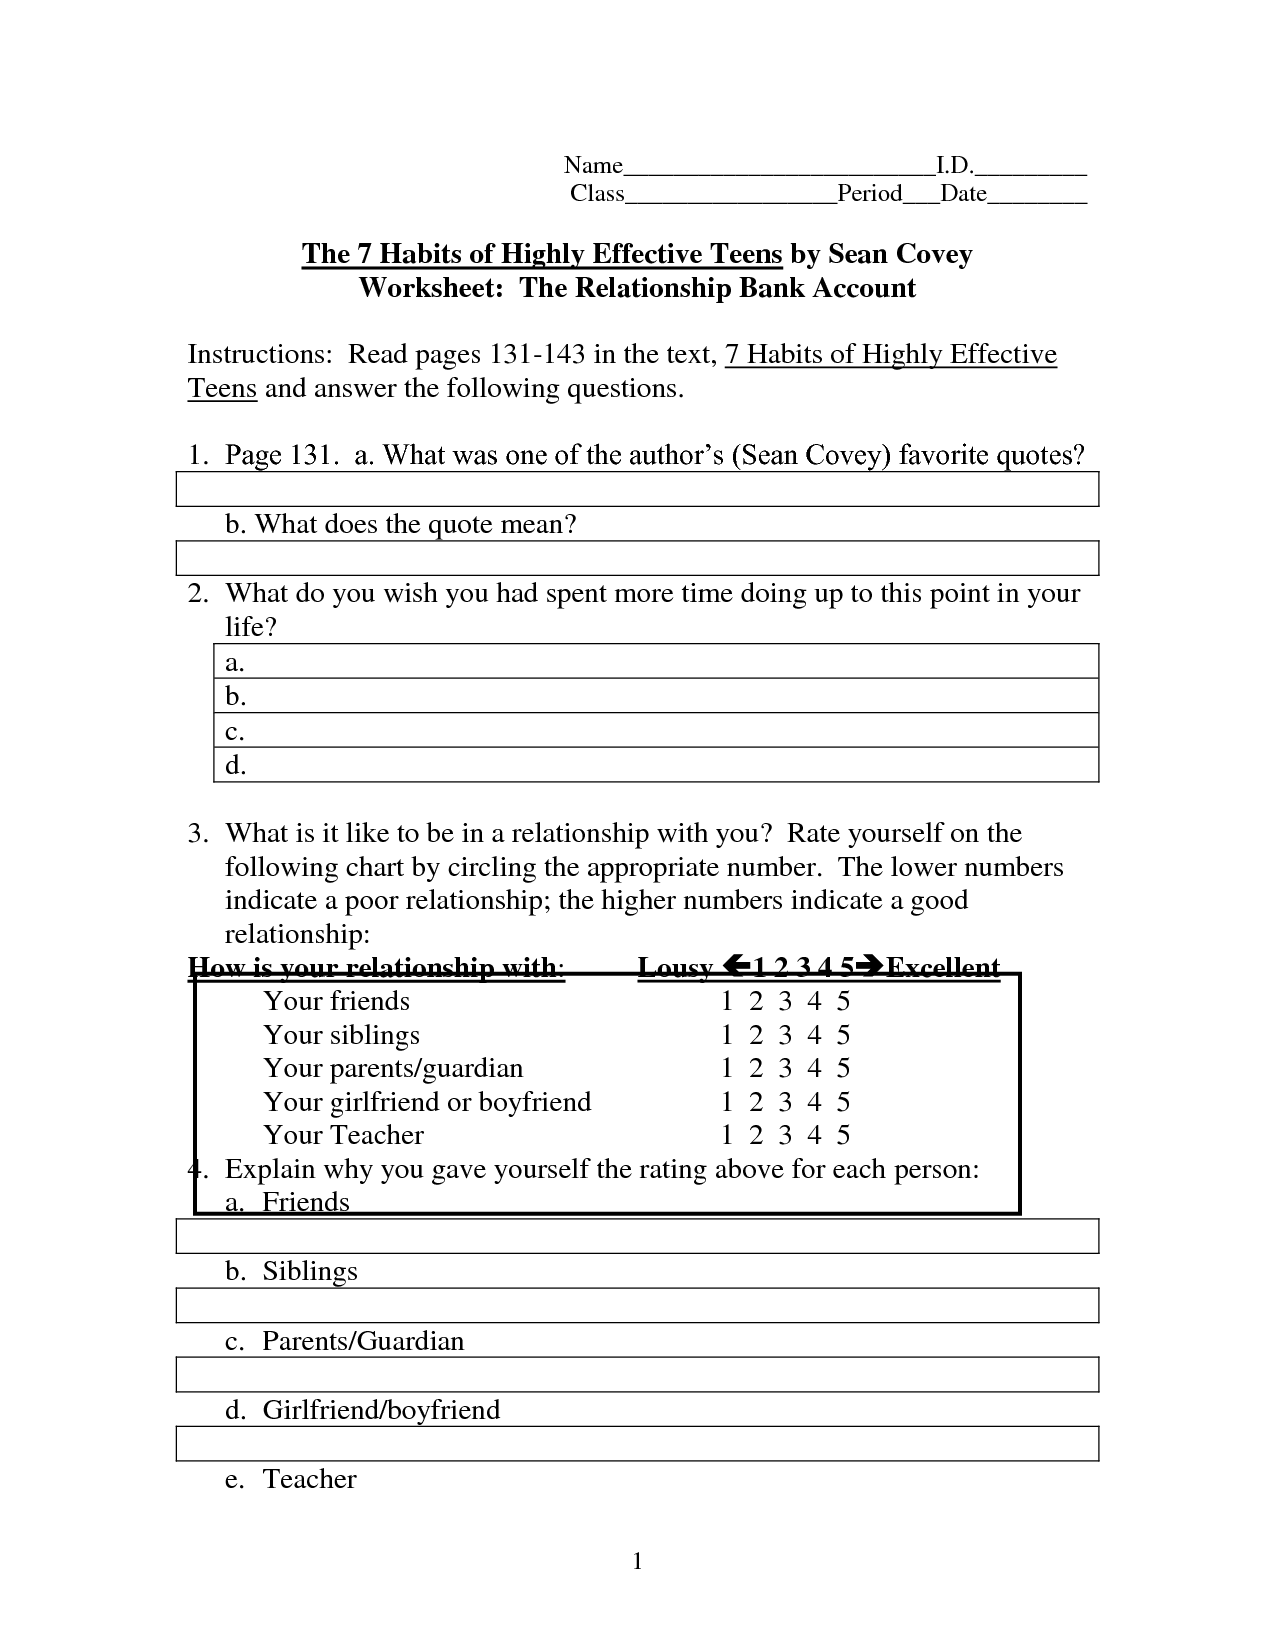 12 Best Images of Teen Dating Violence Worksheets - Group Therapy